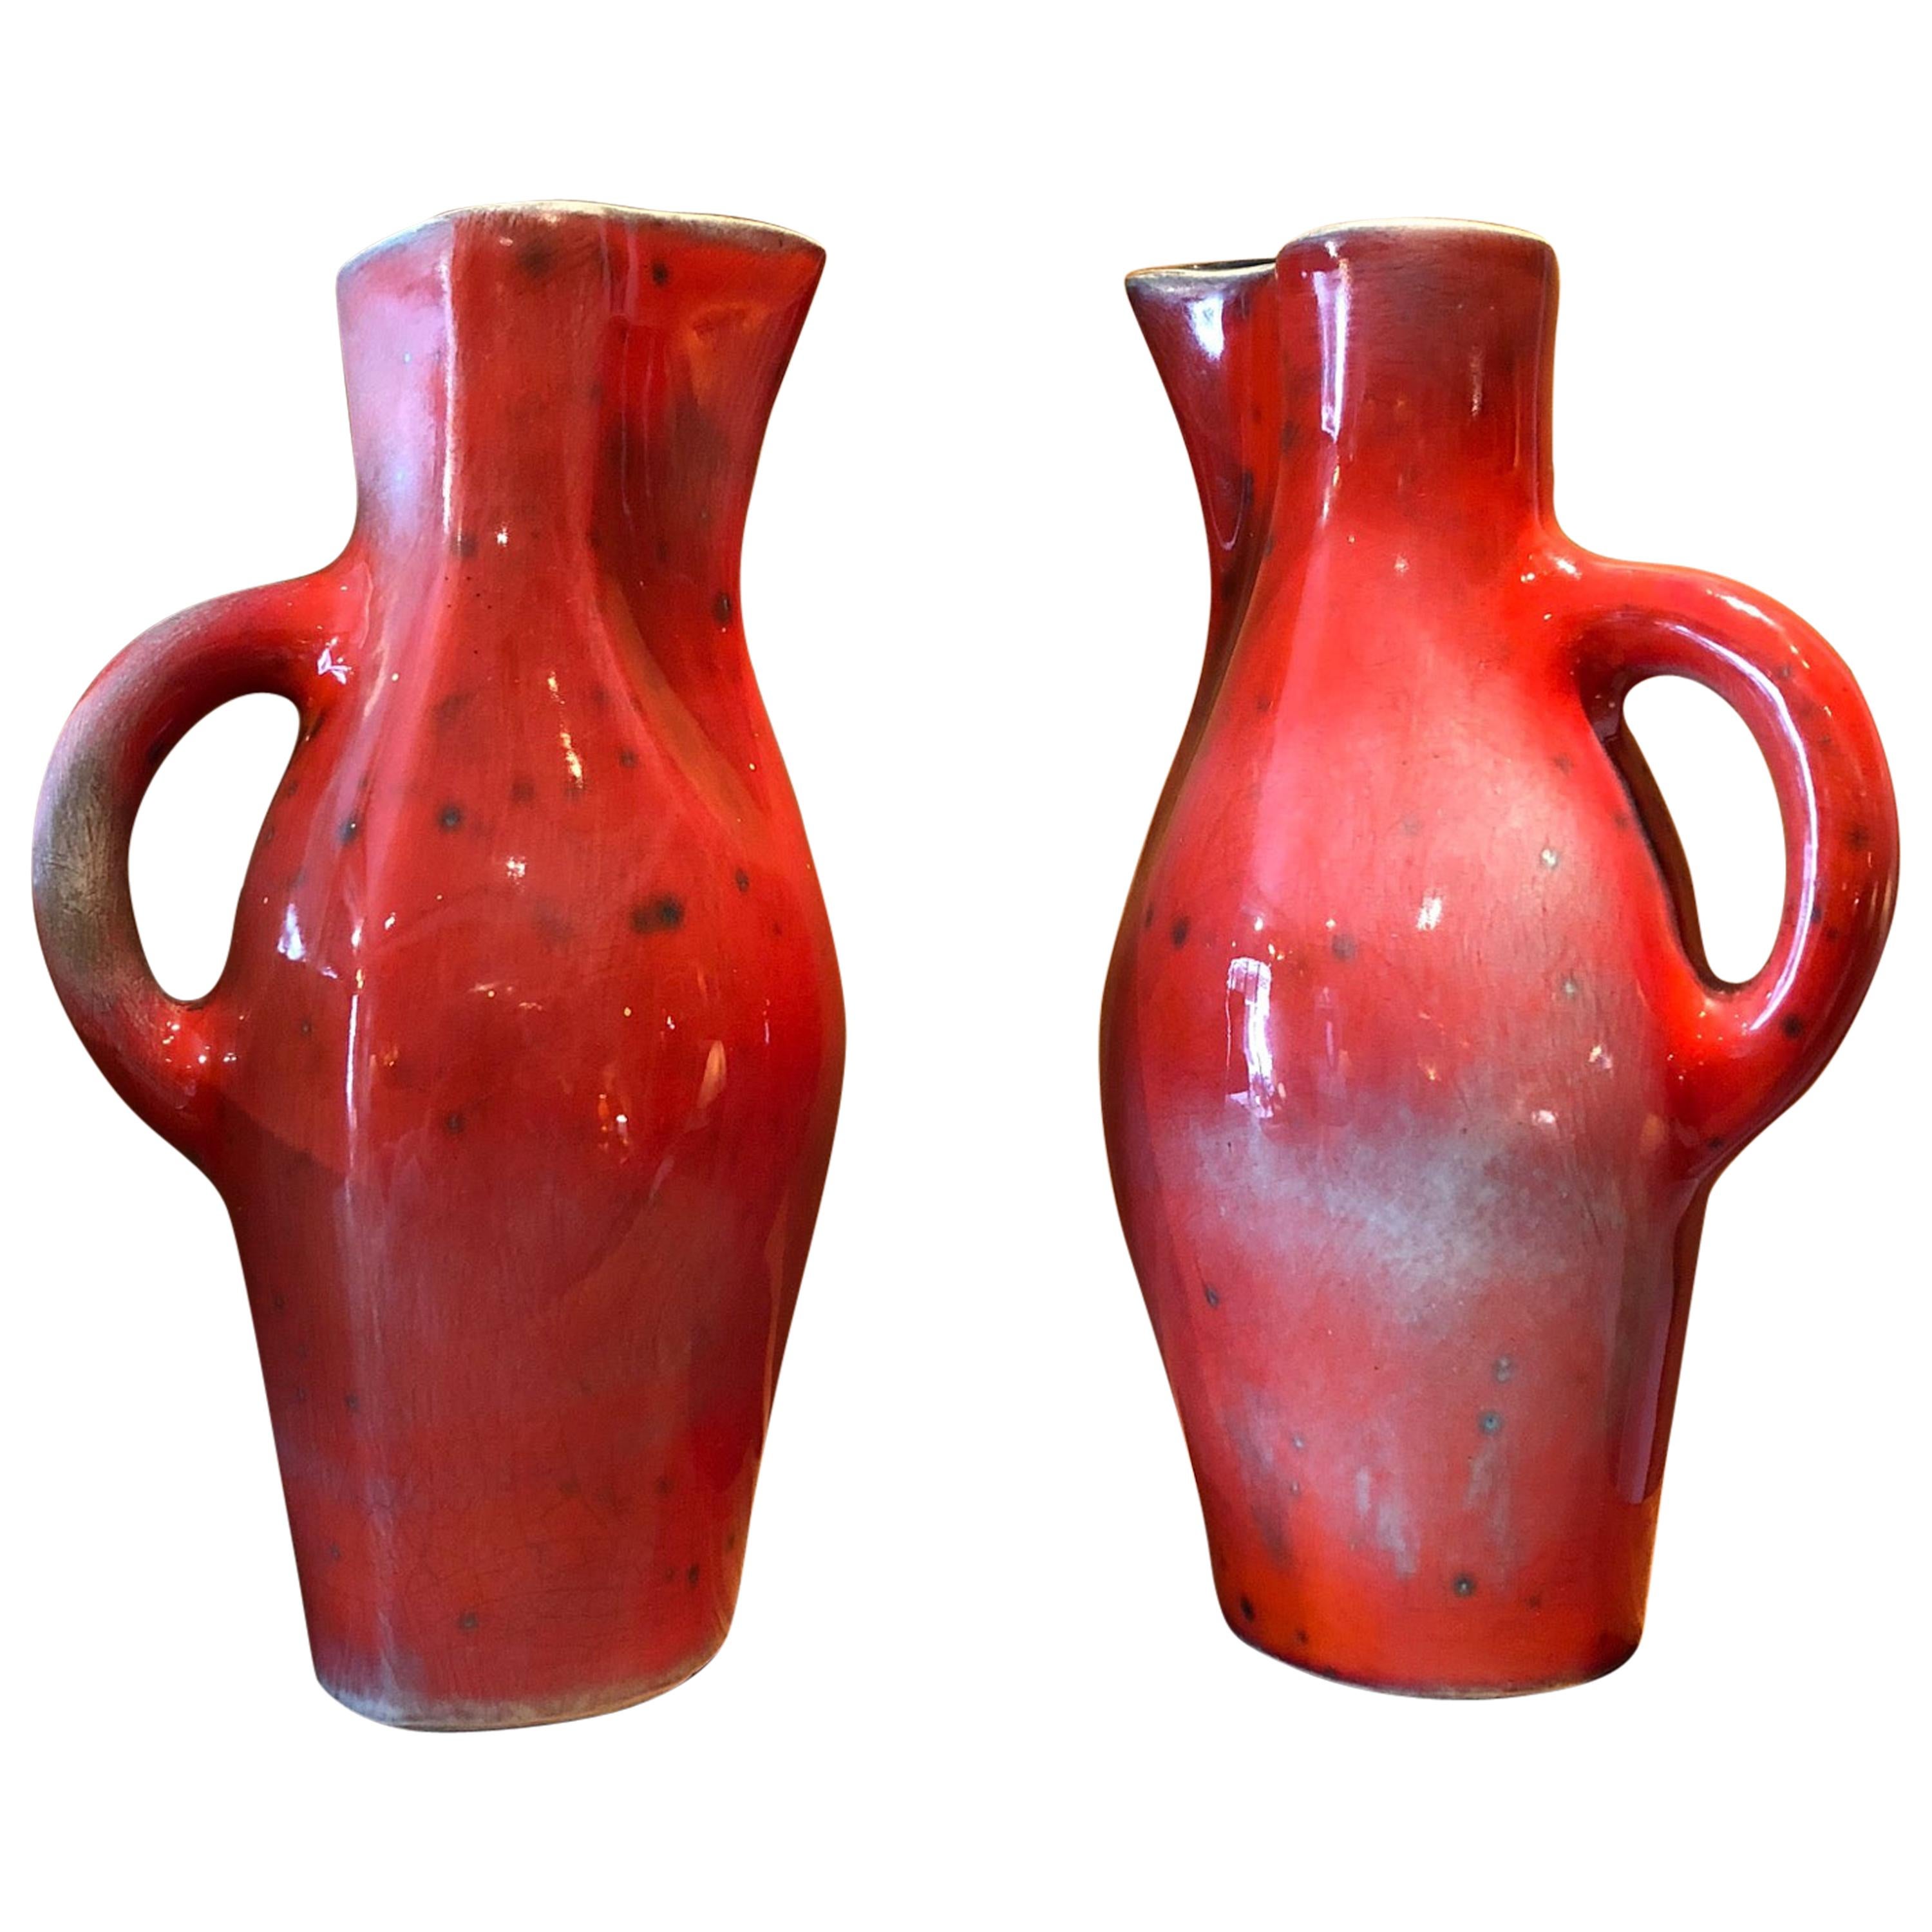 Pair of ceramic pitchers by Georges Jouve